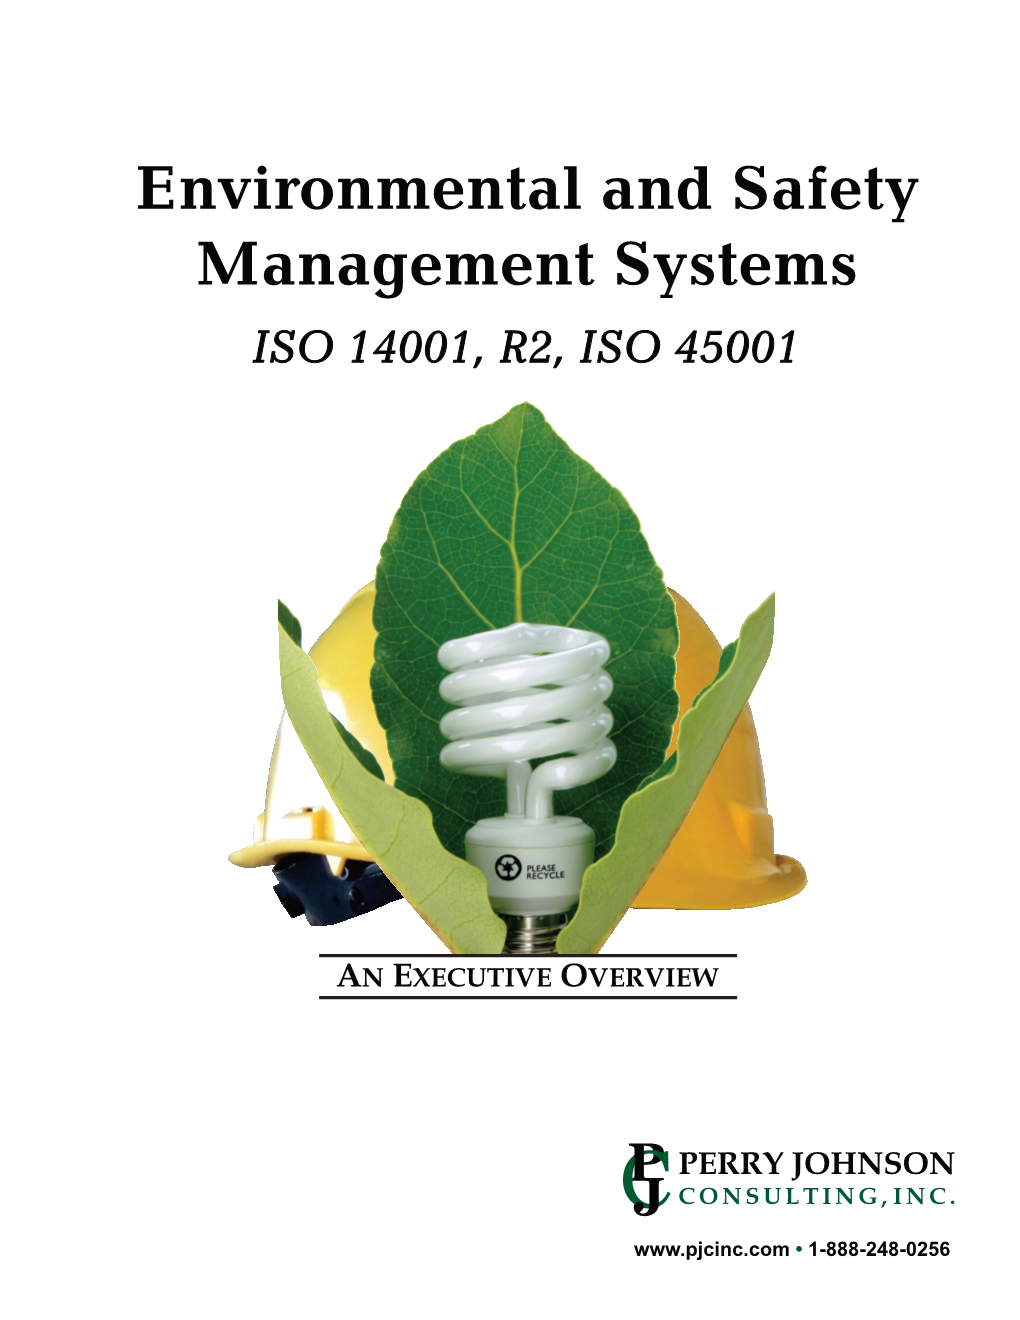 Environmental and Safety Management Systems (ISO 14000, R2, ISO 45001)